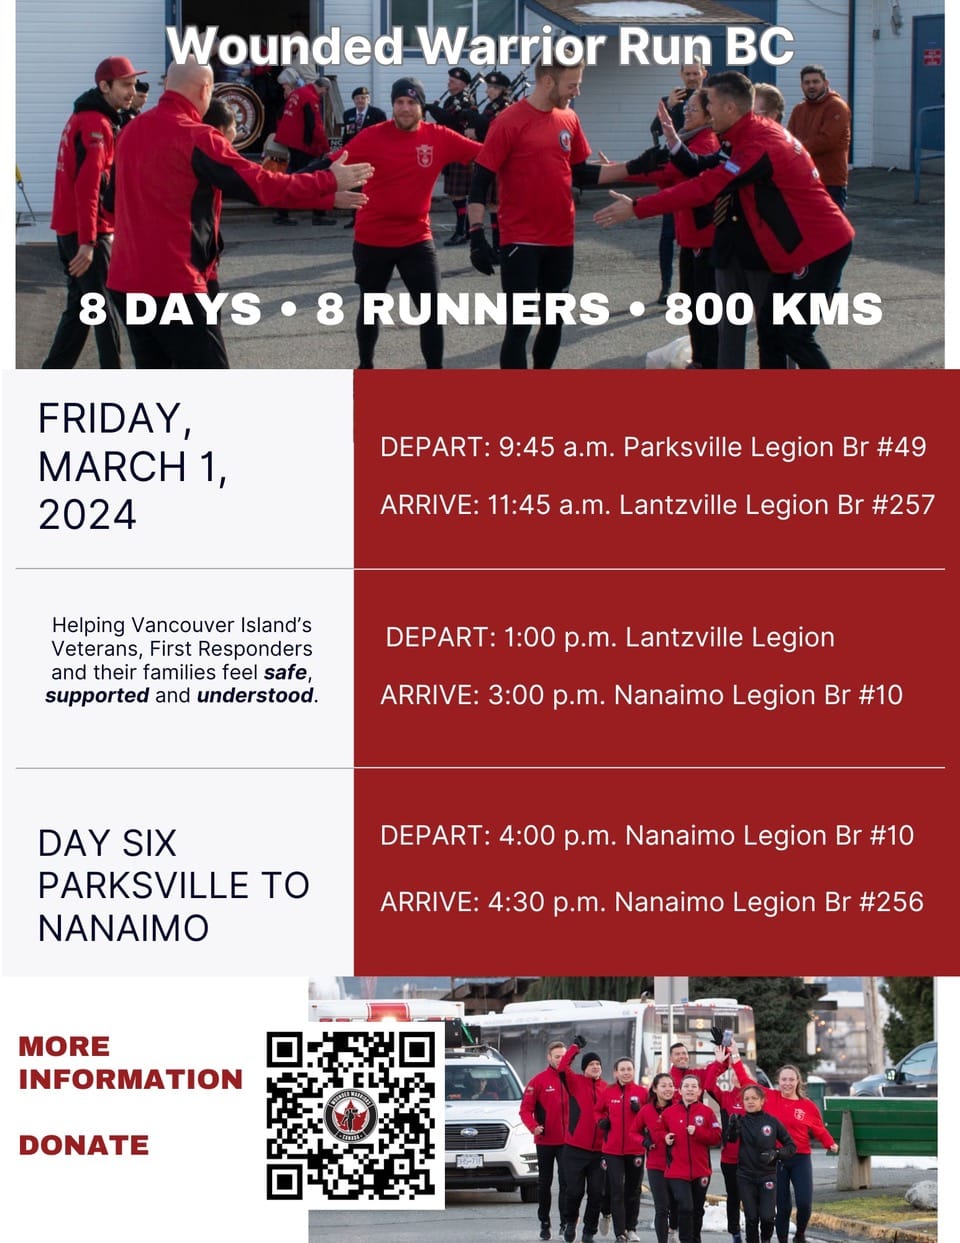 Wounded Warriors Run BC - Friday March 1, 2024 Day 6 Parksville to Nanaimo